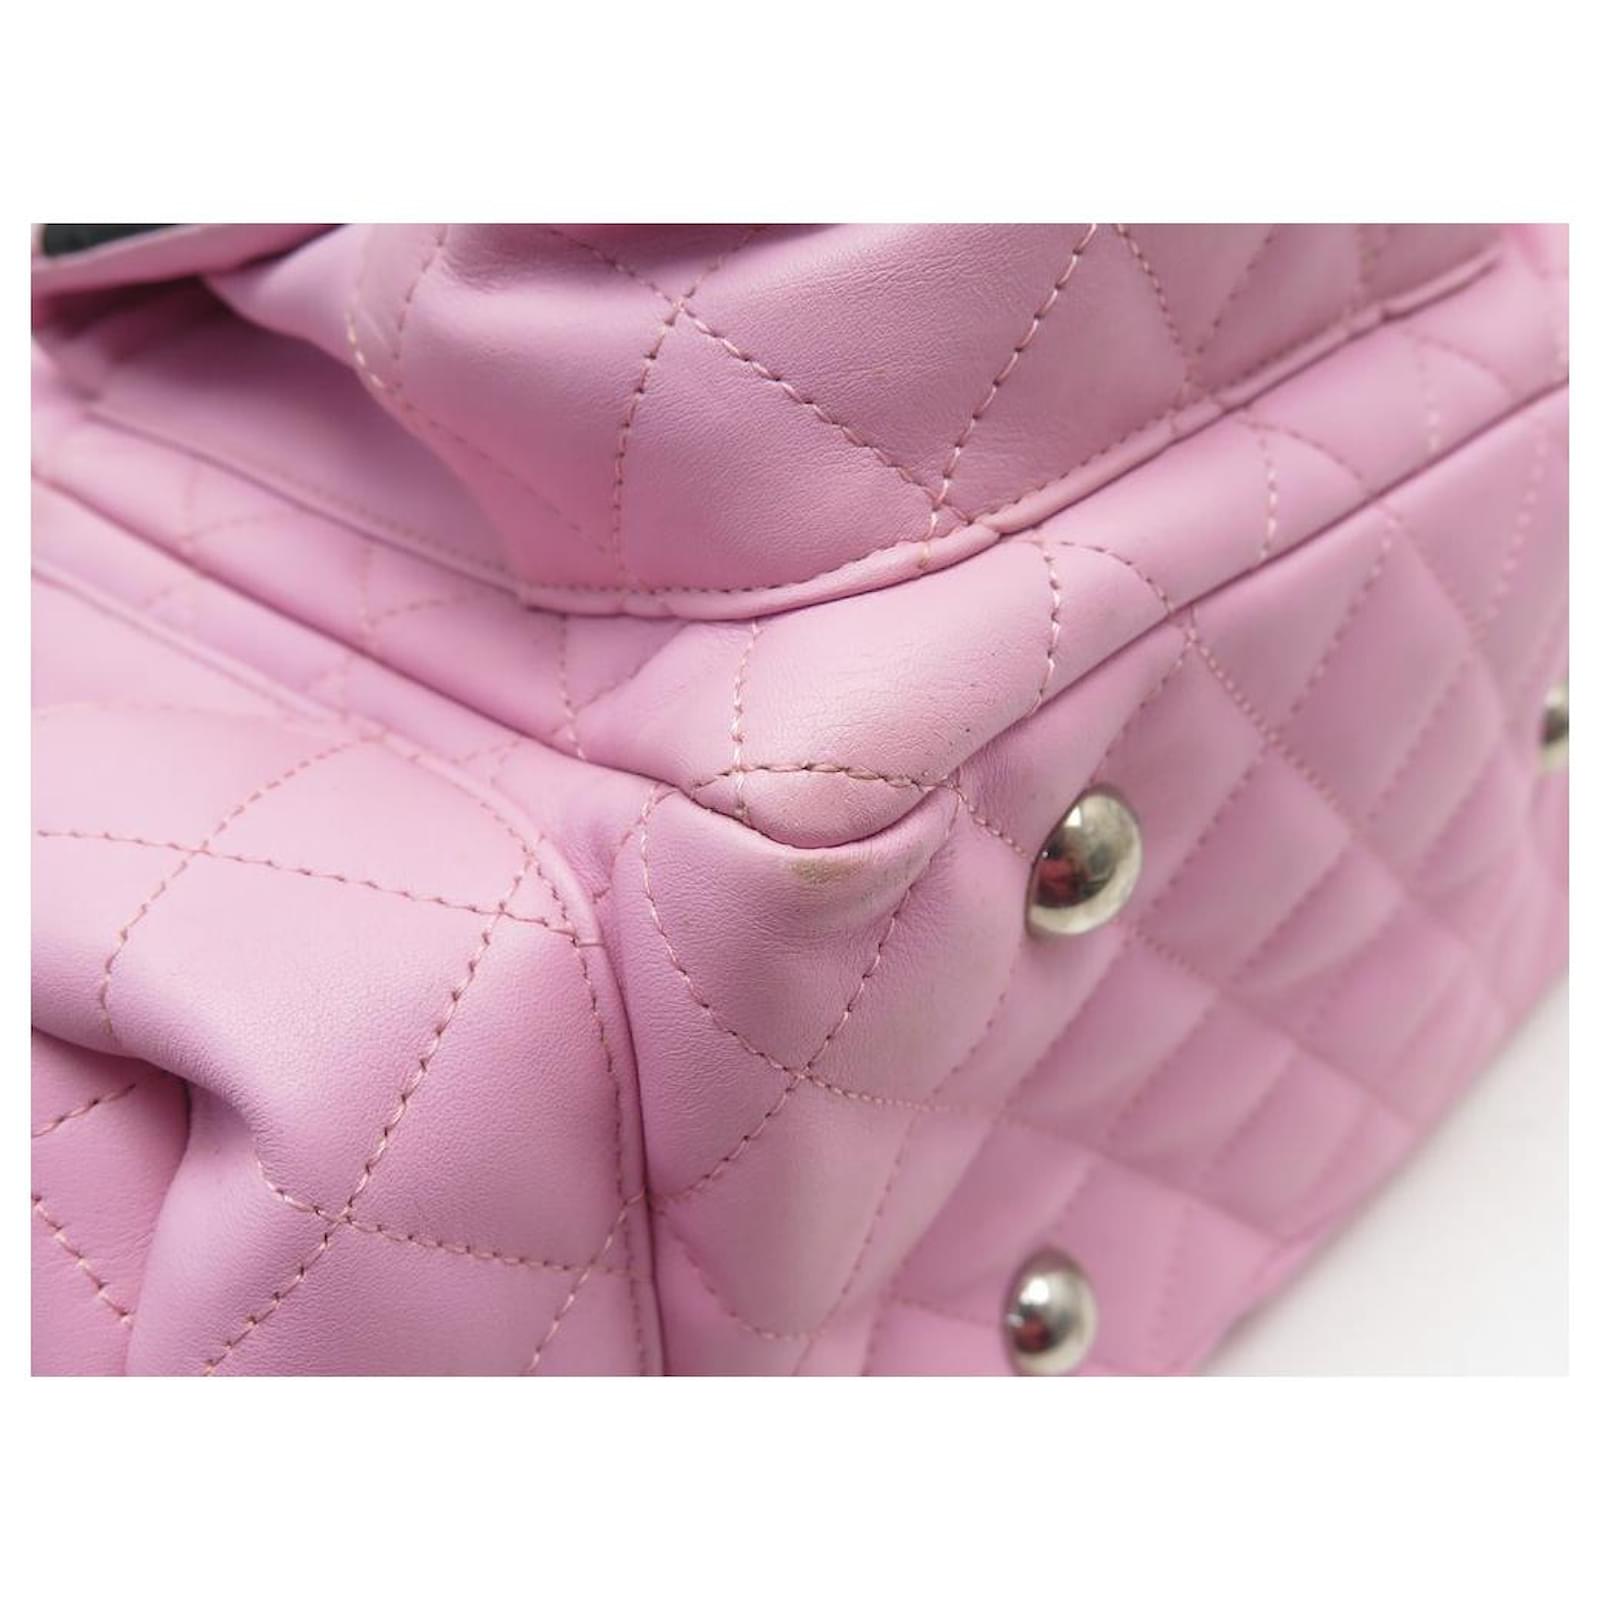 CHANEL CAMBON REPORTER GM HANDBAG IN PINK QUILTED LEATHER HAND BAG